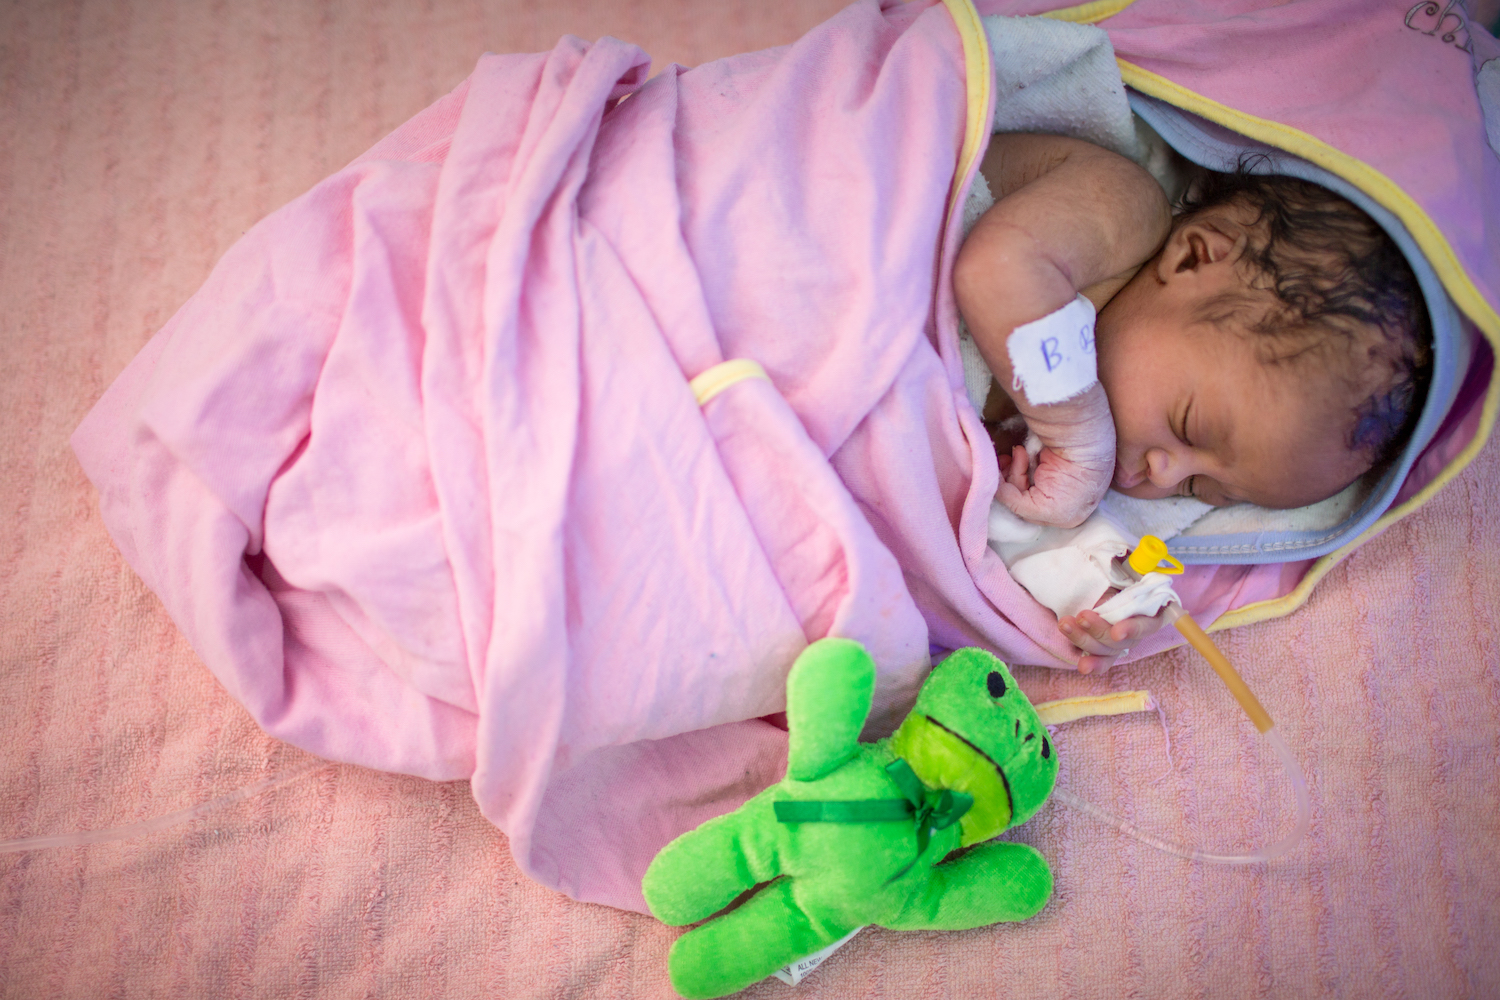 A newborn infant receives specialised care at the UNICEF